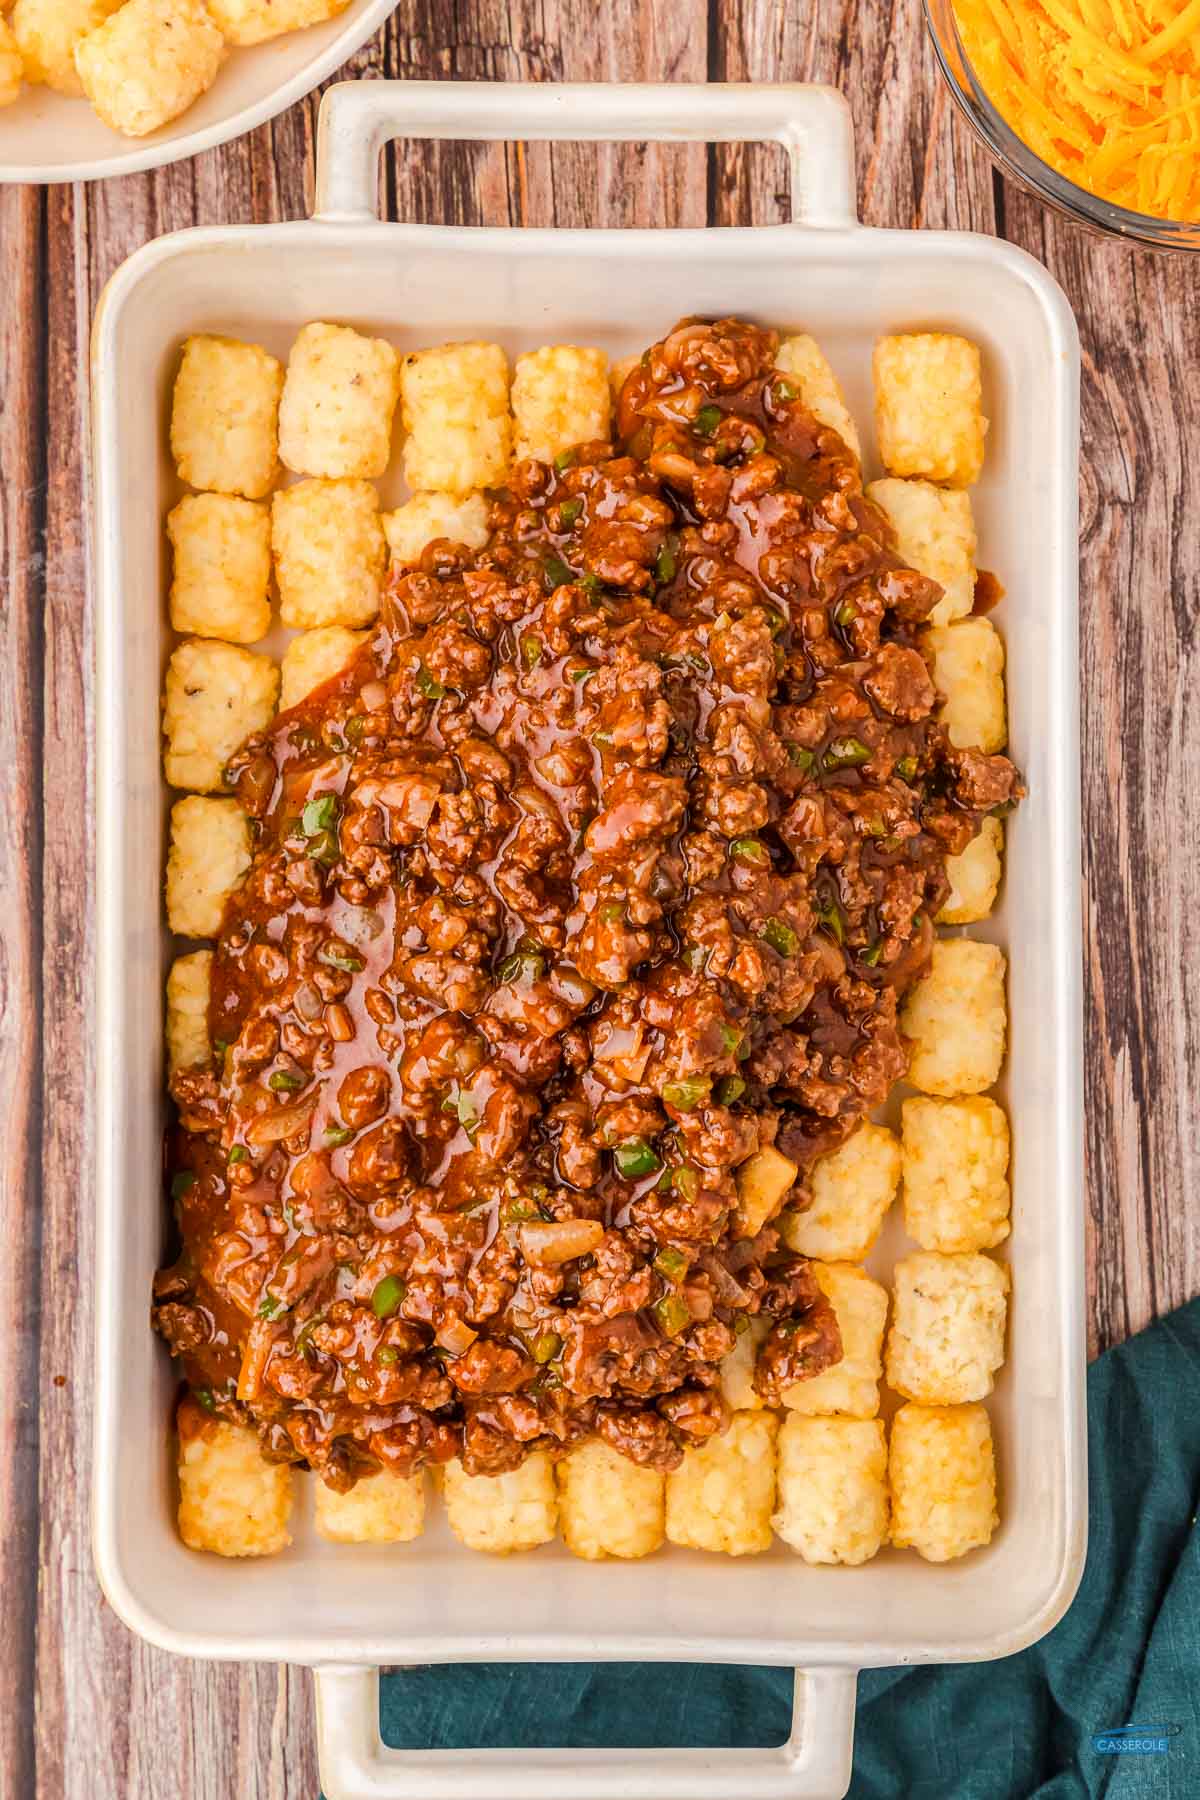 layer the sloppy joe mixture over a layer of tater tots